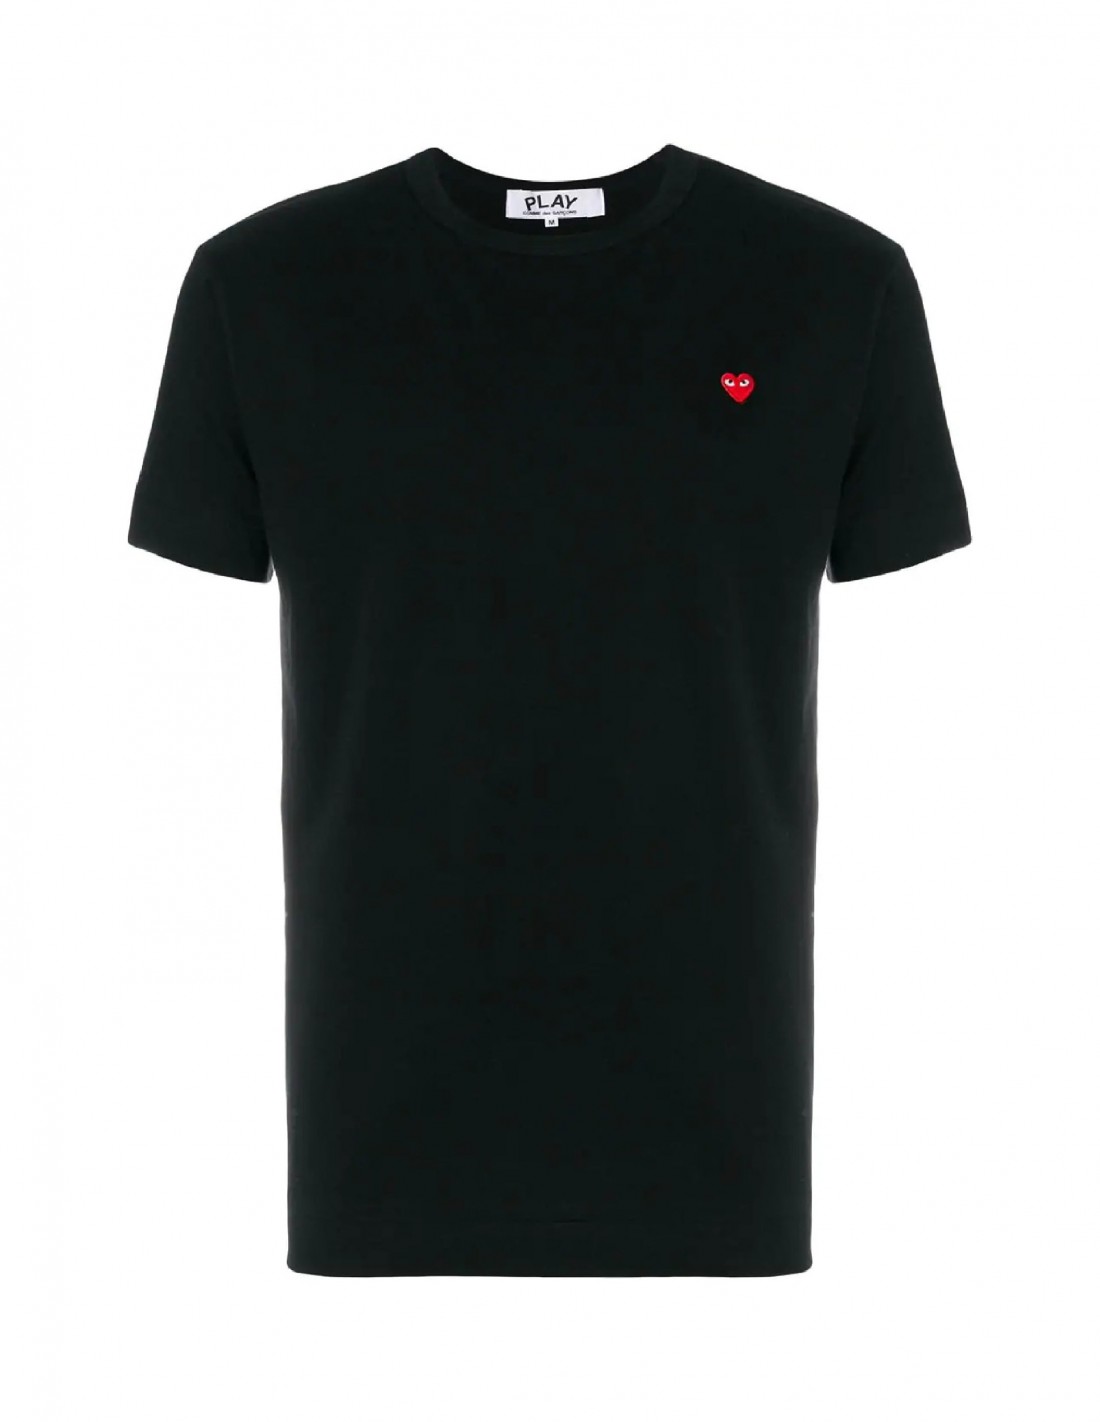 COMME DES GARCONS PLAY black tee shirt with mini red heart